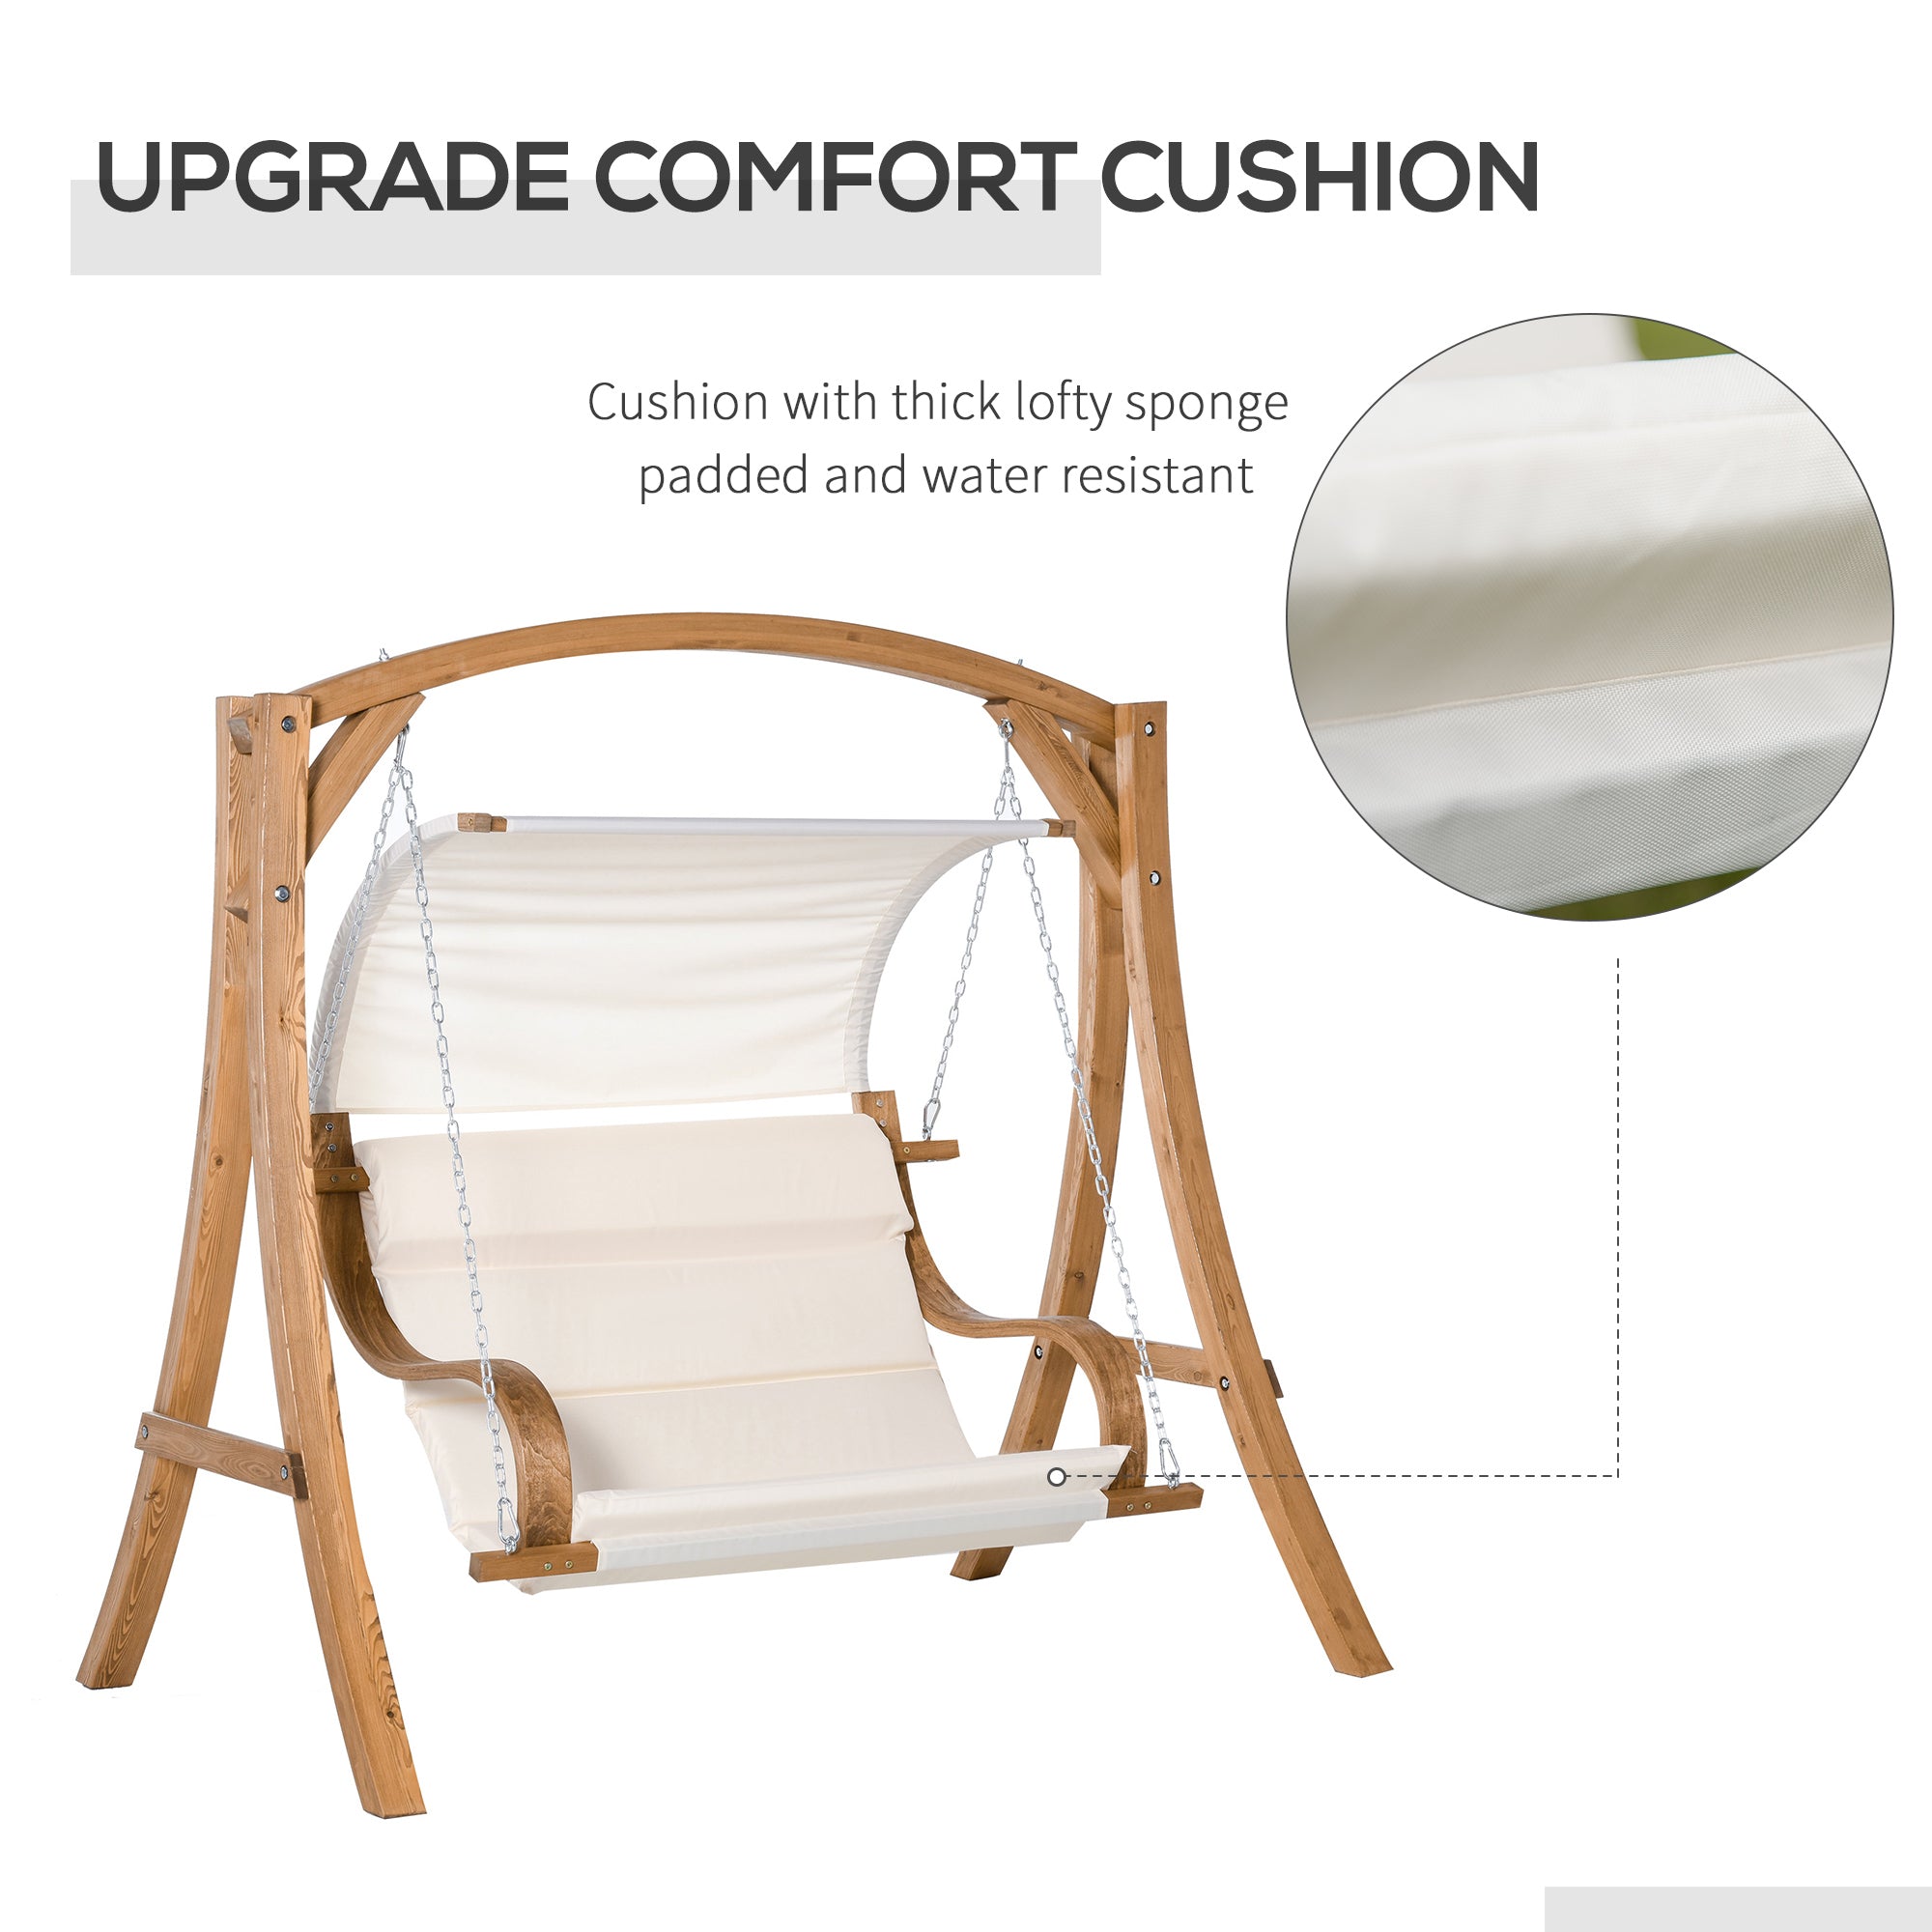 Outsunny Wooden Porch Swing Chair A-Frame Wood Log Swing Bench Chair With Canopy and Cushion for Patio Garden Yard - Inspirely